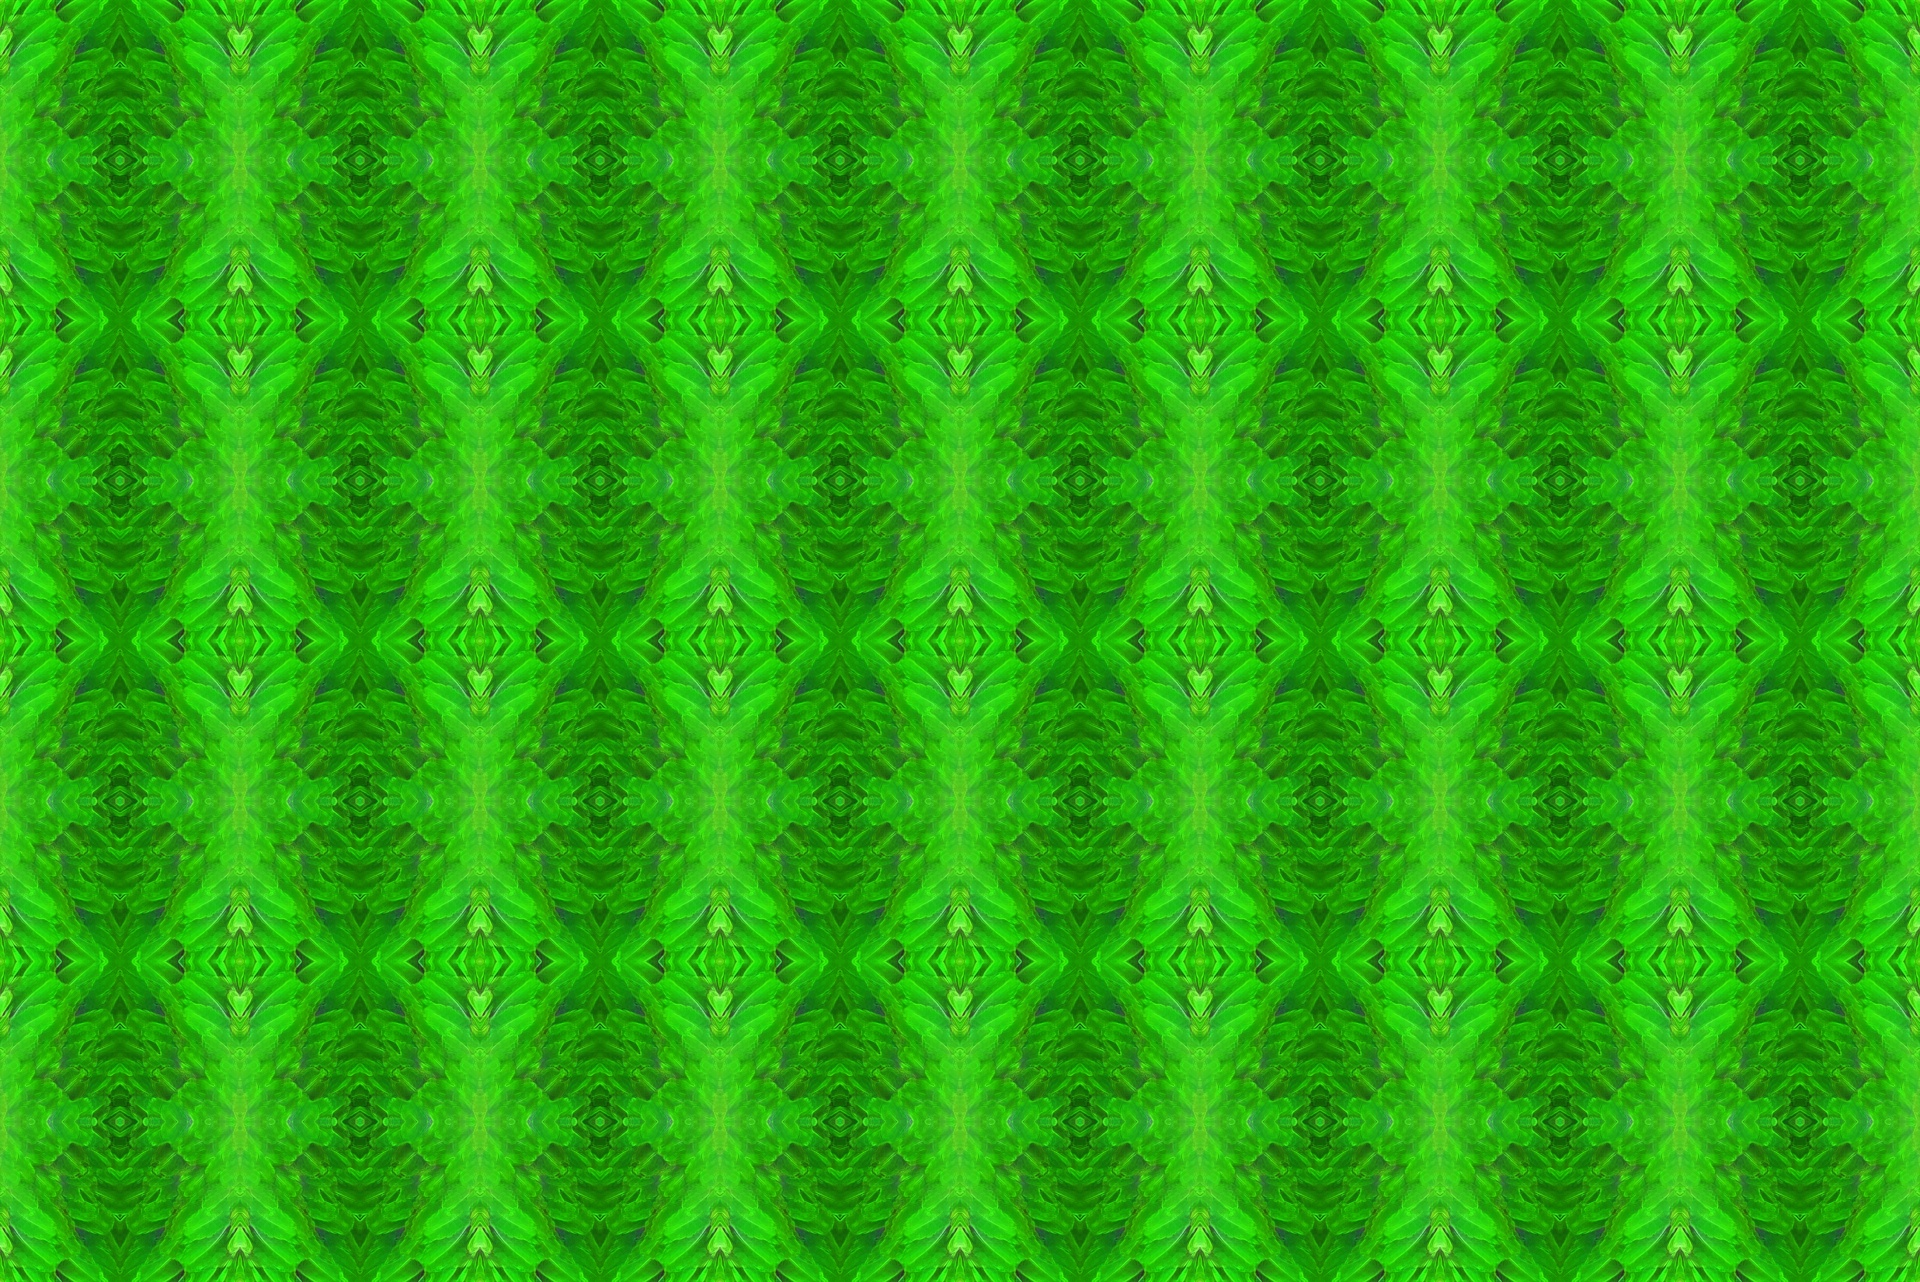 Pattern In Shades Of Green